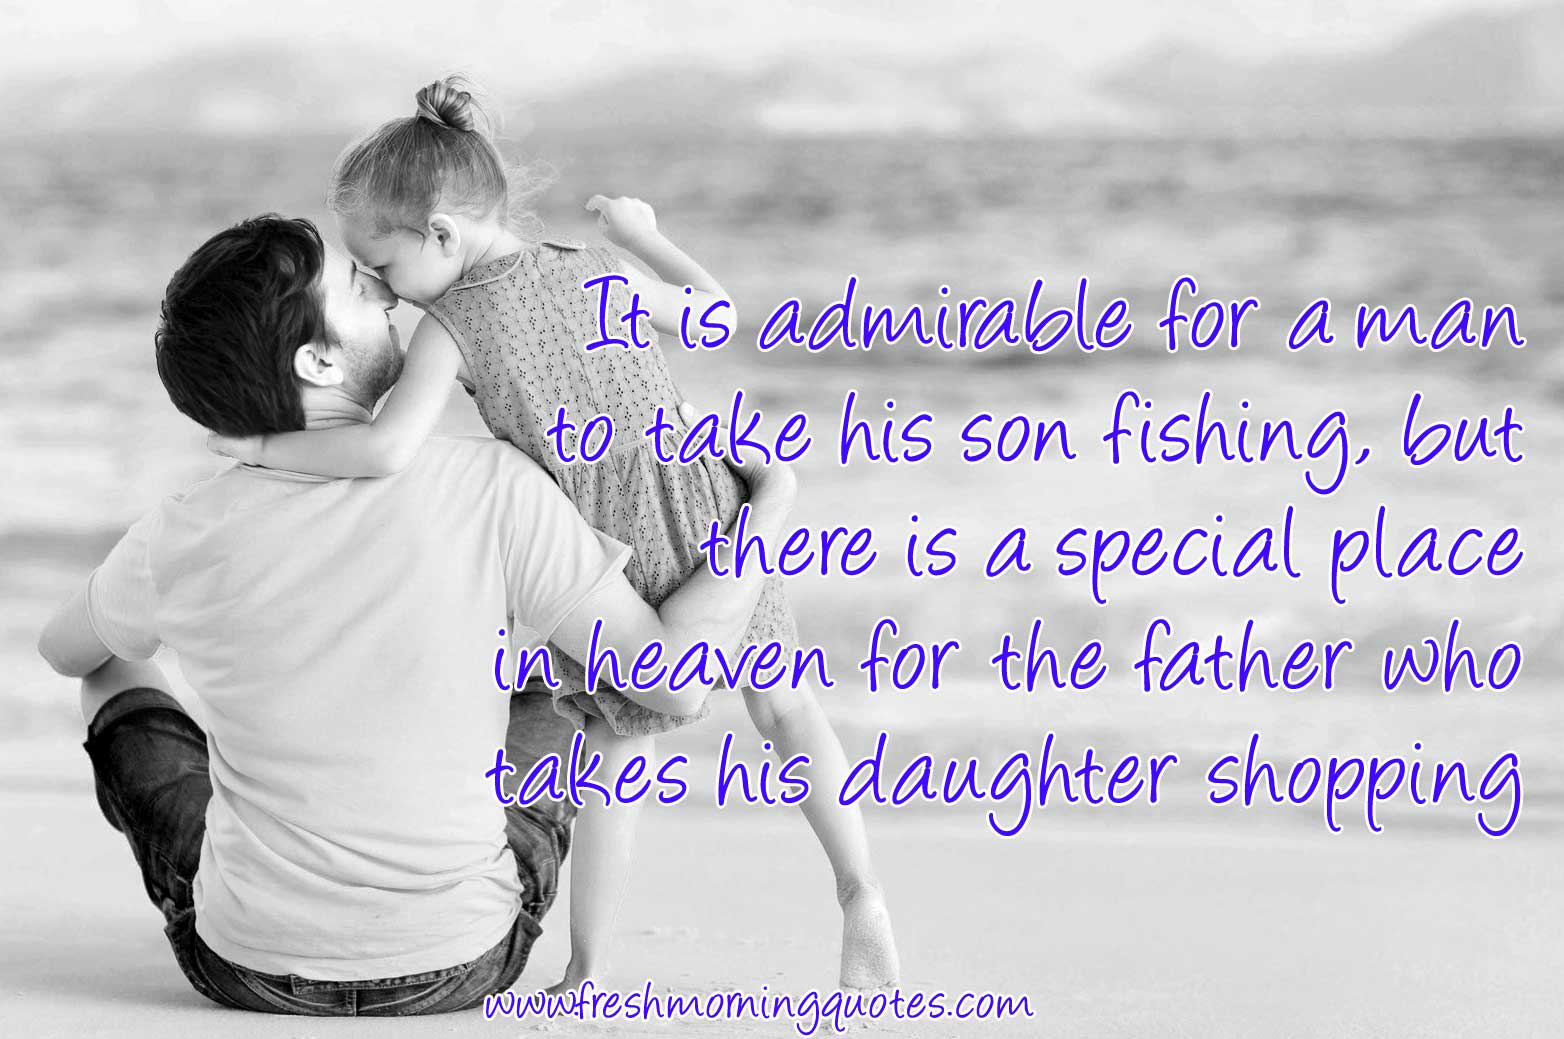 Sweetest Father Daughter Quotes with Image